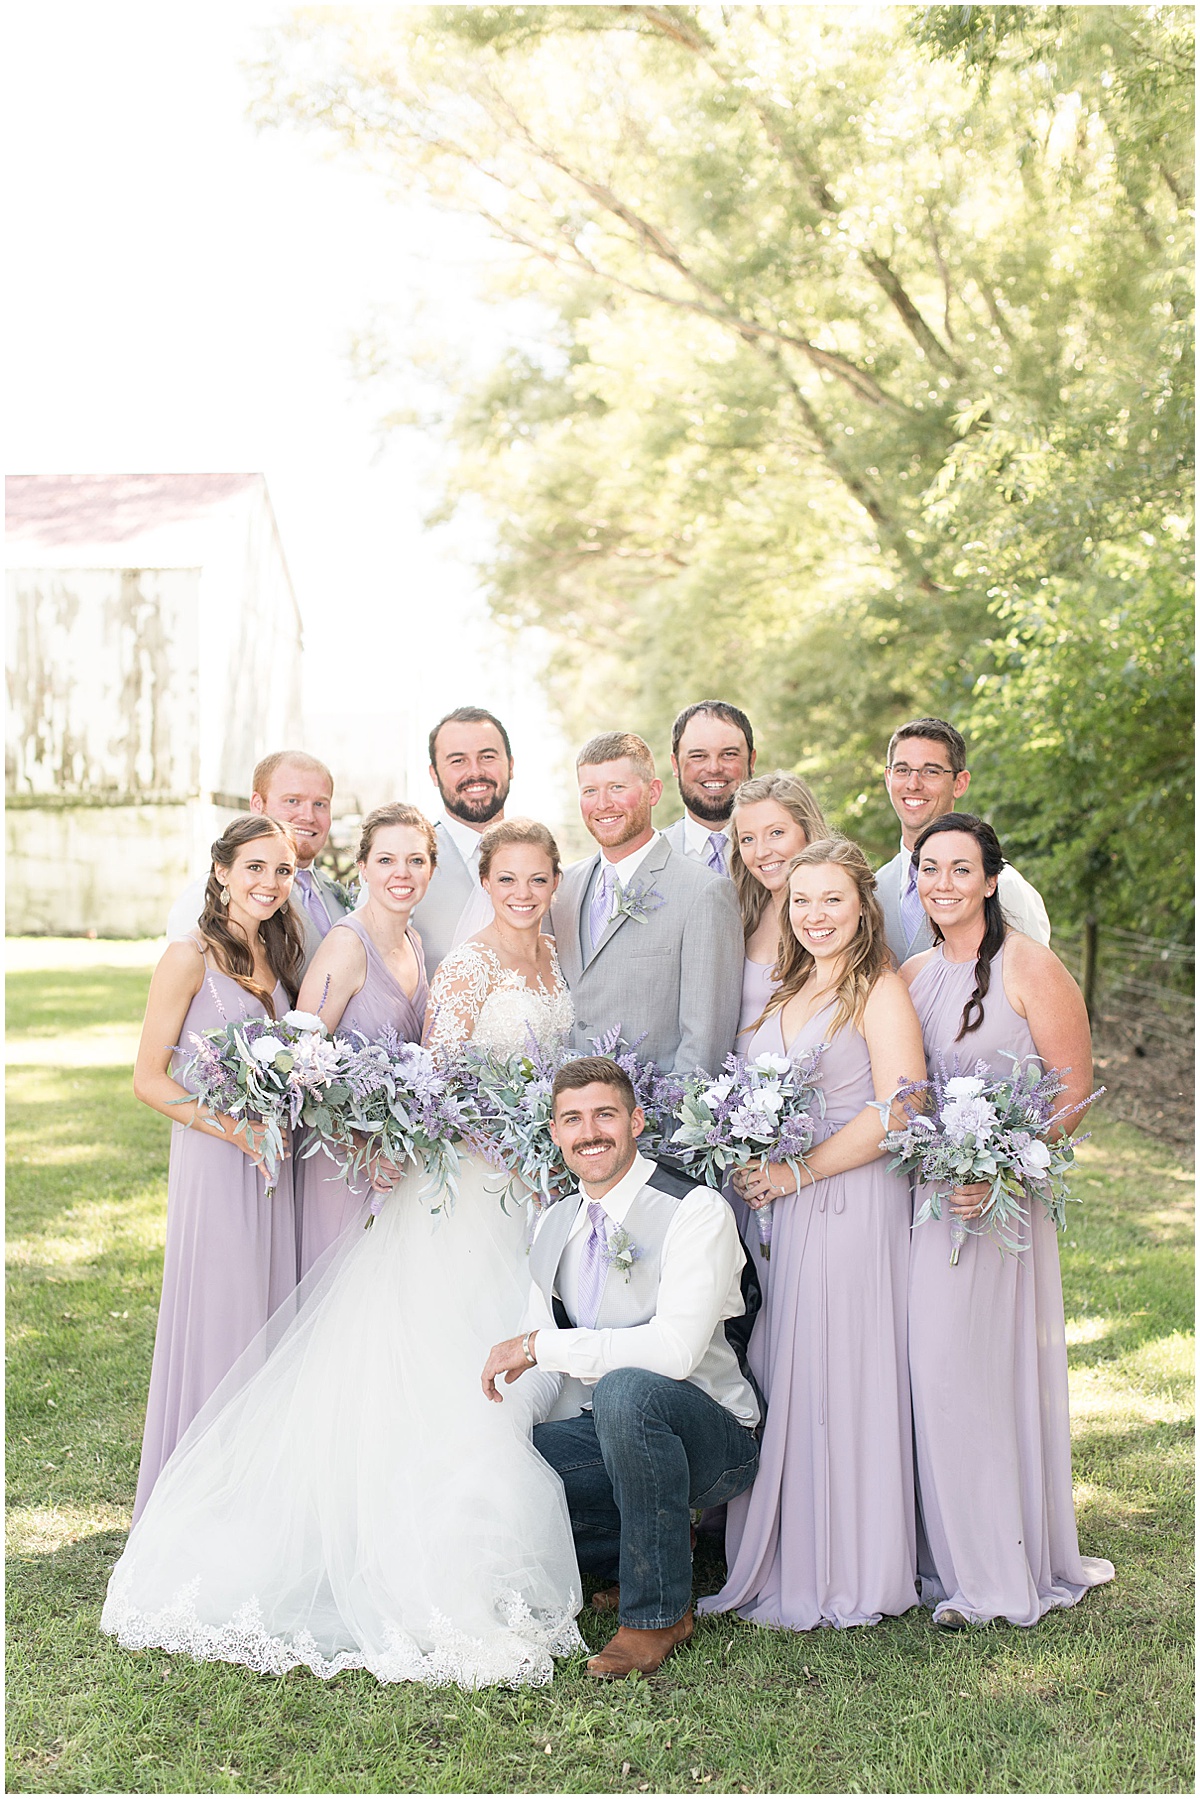 Bridal party for wedding at the Wagner Angus Barn in Wolcott, Indiana by Victoria Rayburn Photography